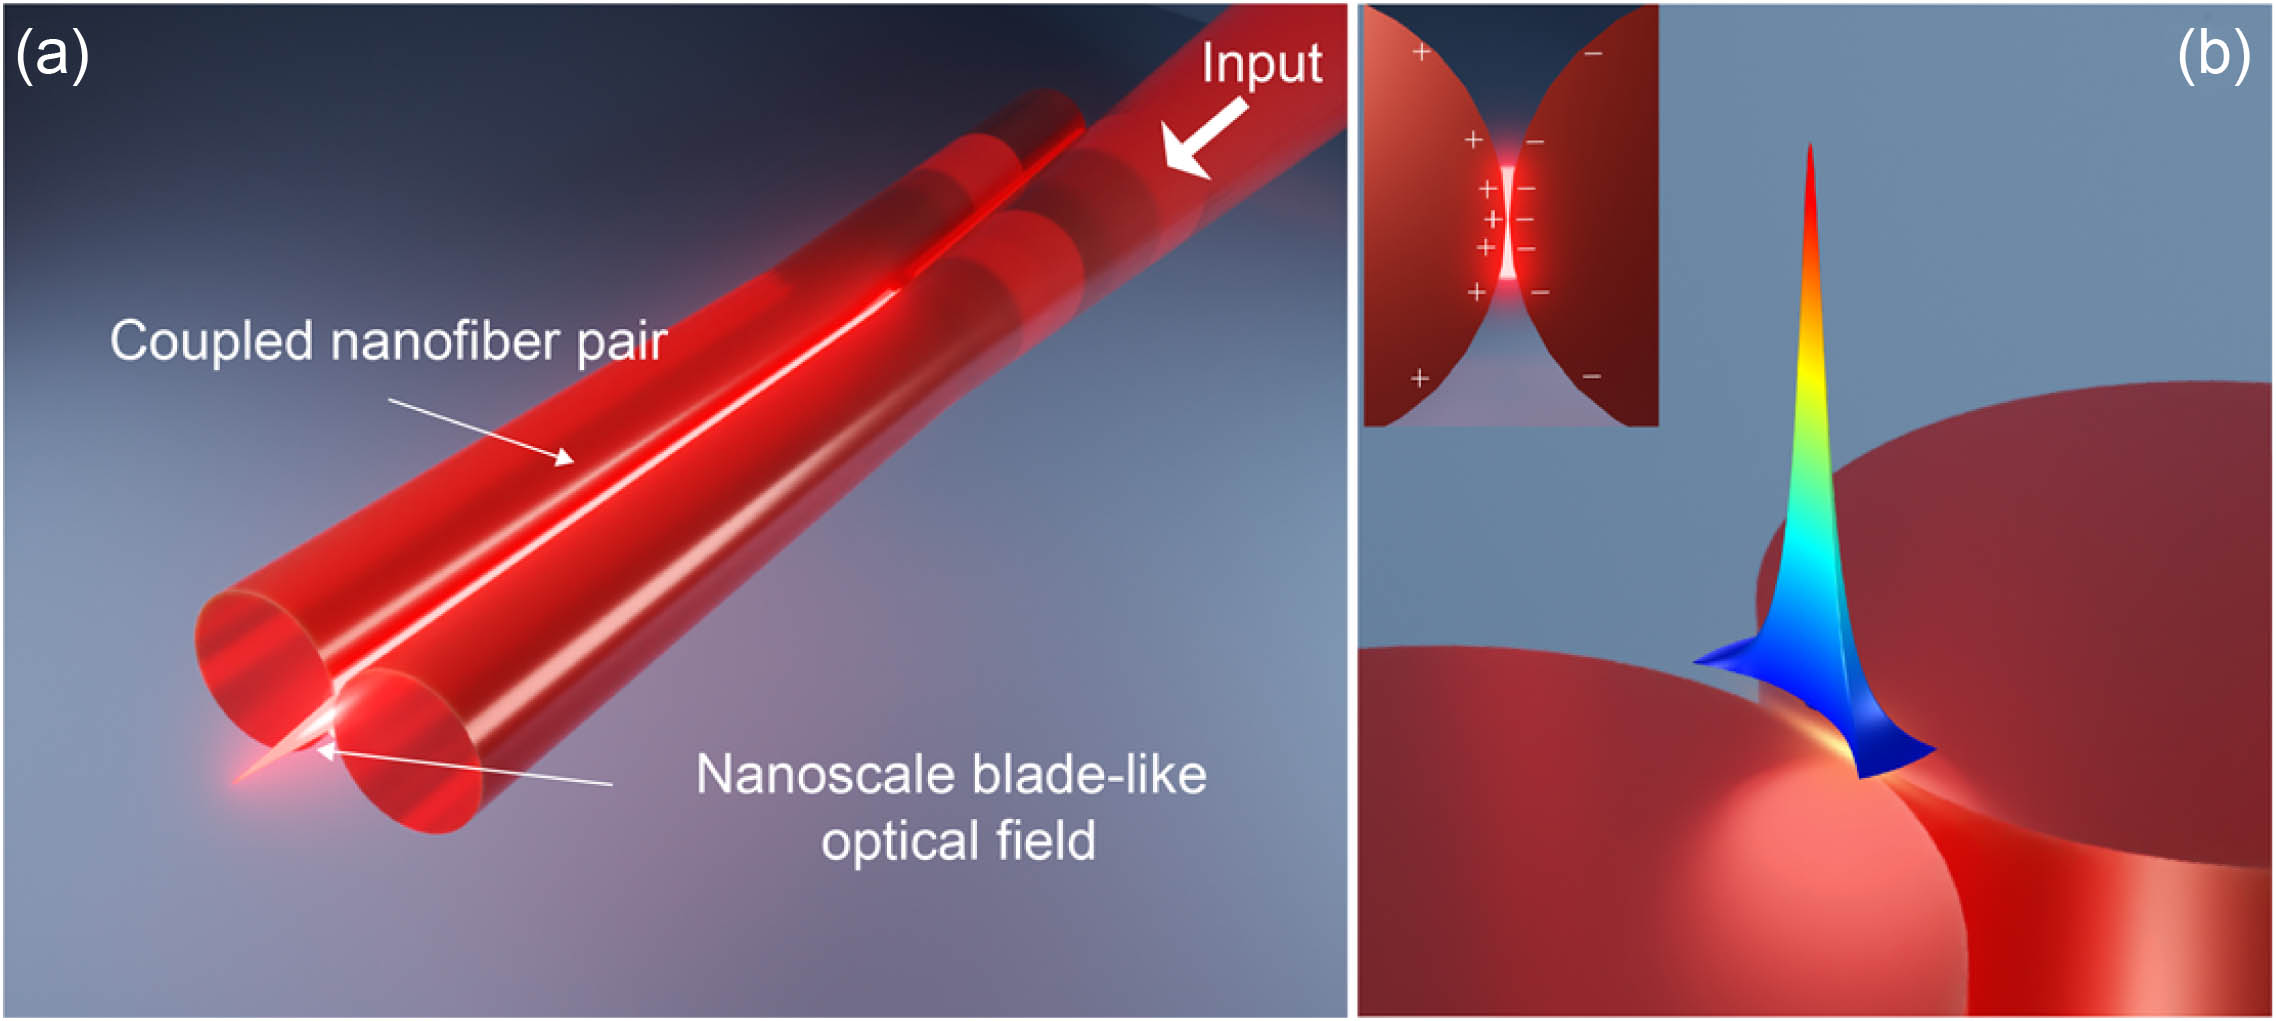 (a) Schematic illustration of generating a nanoscale blade-like optical field in a CNP. (b) Close-up profile of the field around the slit in (a). The inset illustrates cross-sectional distribution of the polarized charge density.